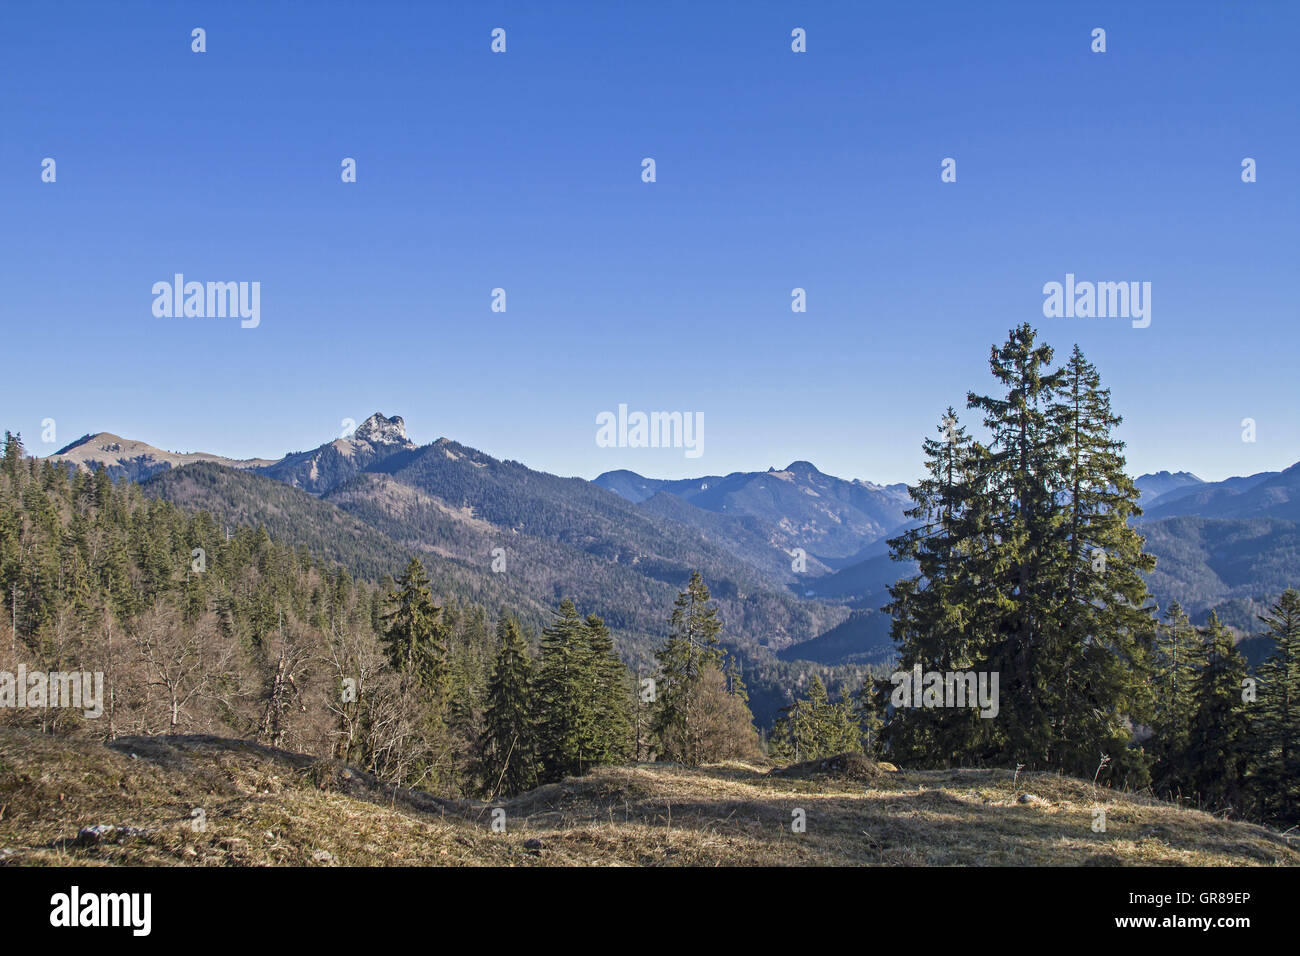 Landscape In The Bavarian Alps Near Lenggries Stock Photo